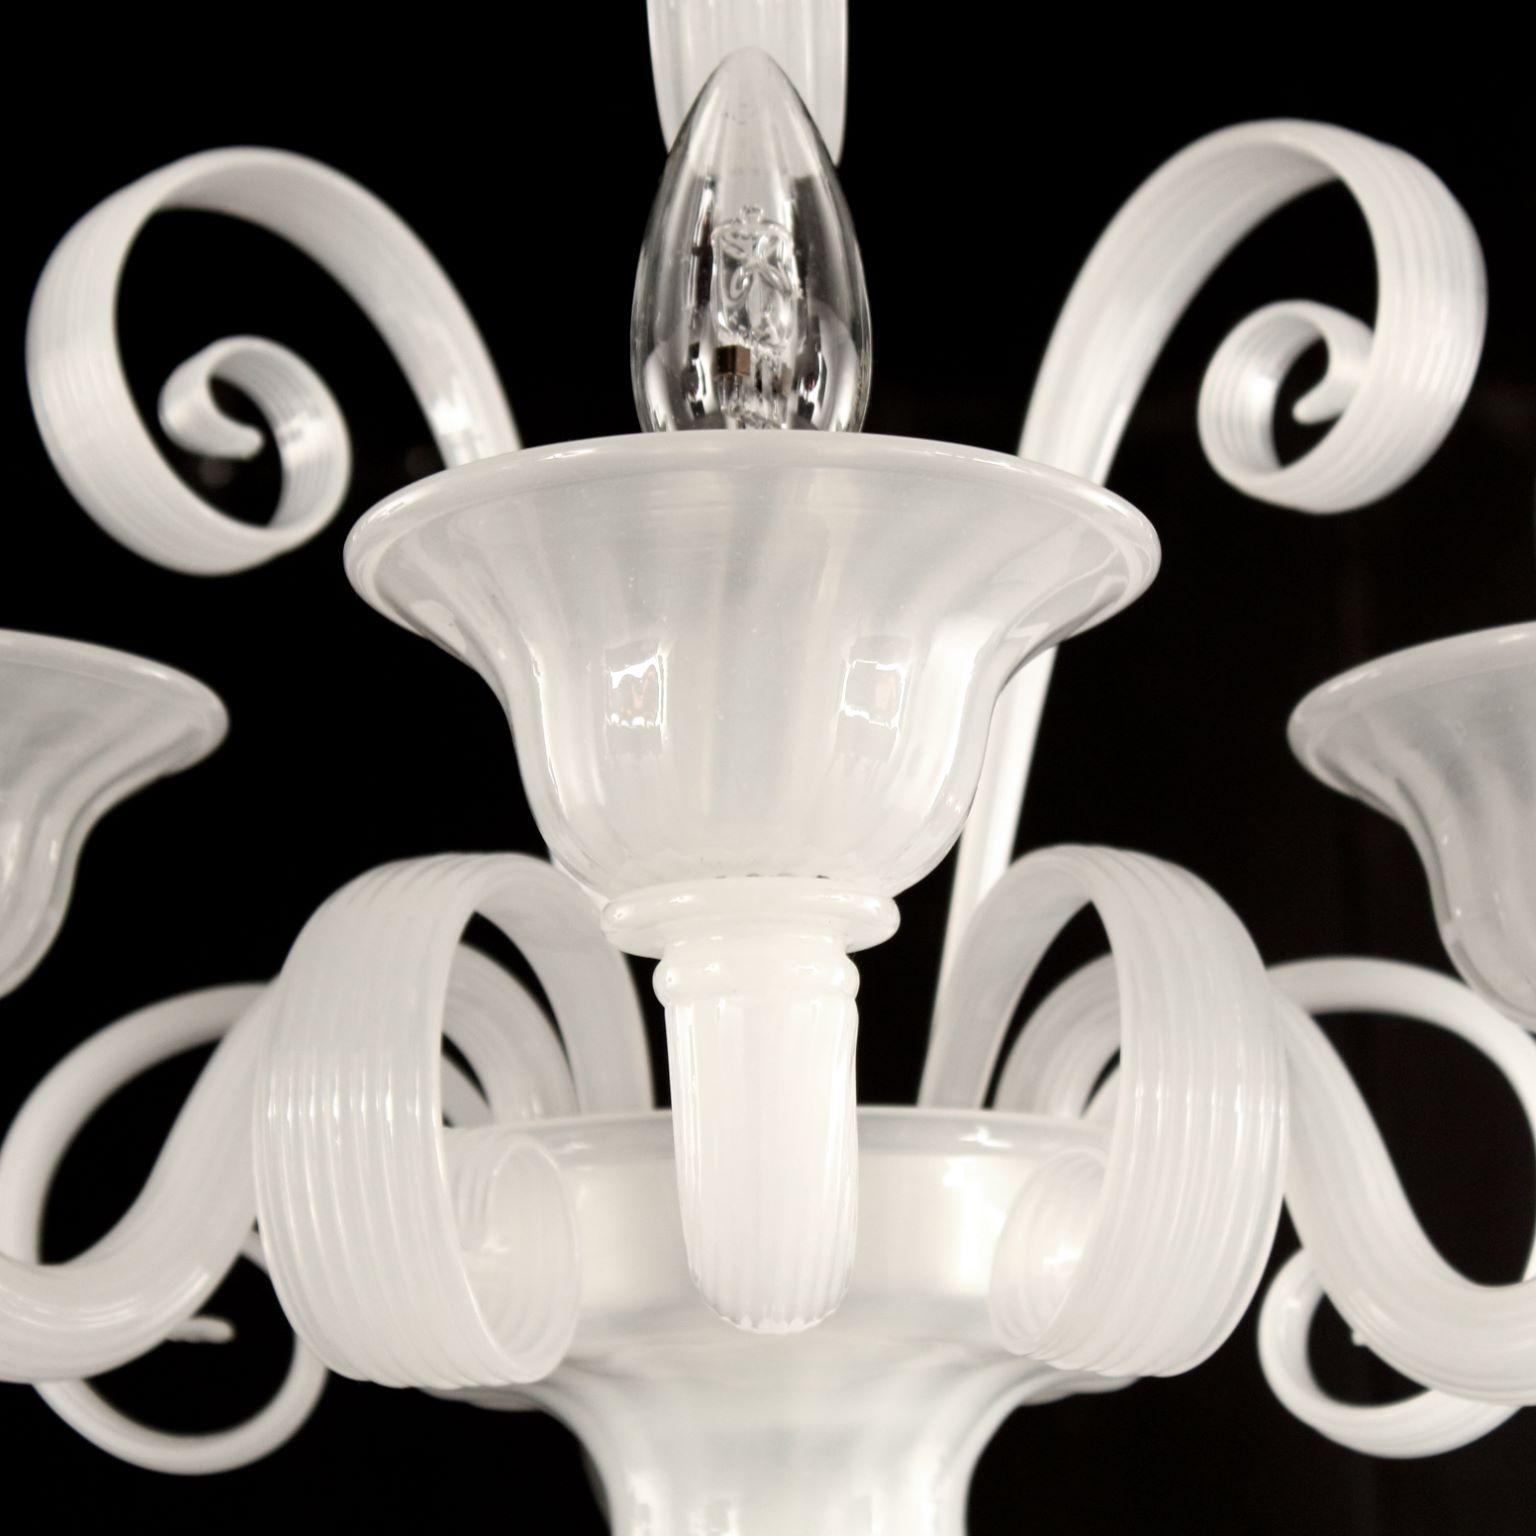 Capriccio sconce 3 lights, white silk  artistic glass, with curly ornamental elements by Multiforme.
Inspired by the Classic Venetian tradition it is characterised by a central column where many blown glass “pastoral” elements are installed. These